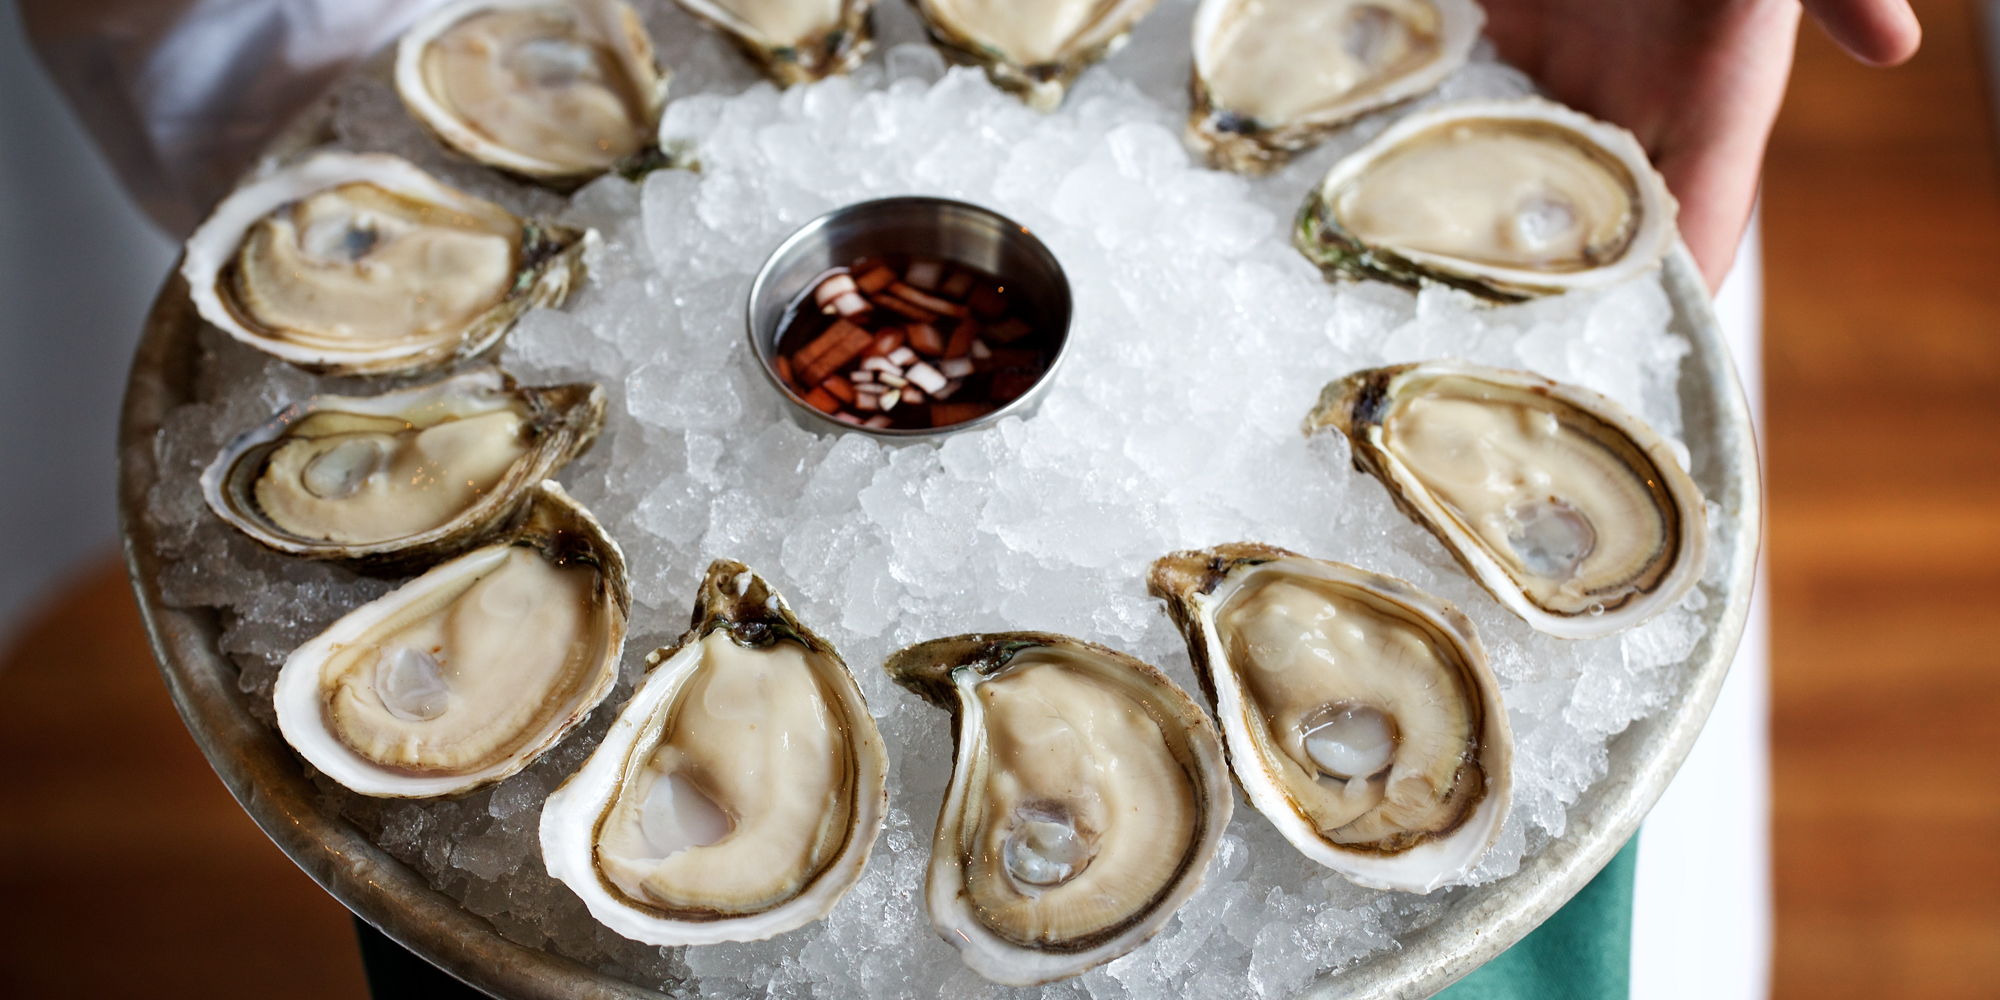 Oyster Happy Hour at Clyde's Willow Creek Farm promotional image